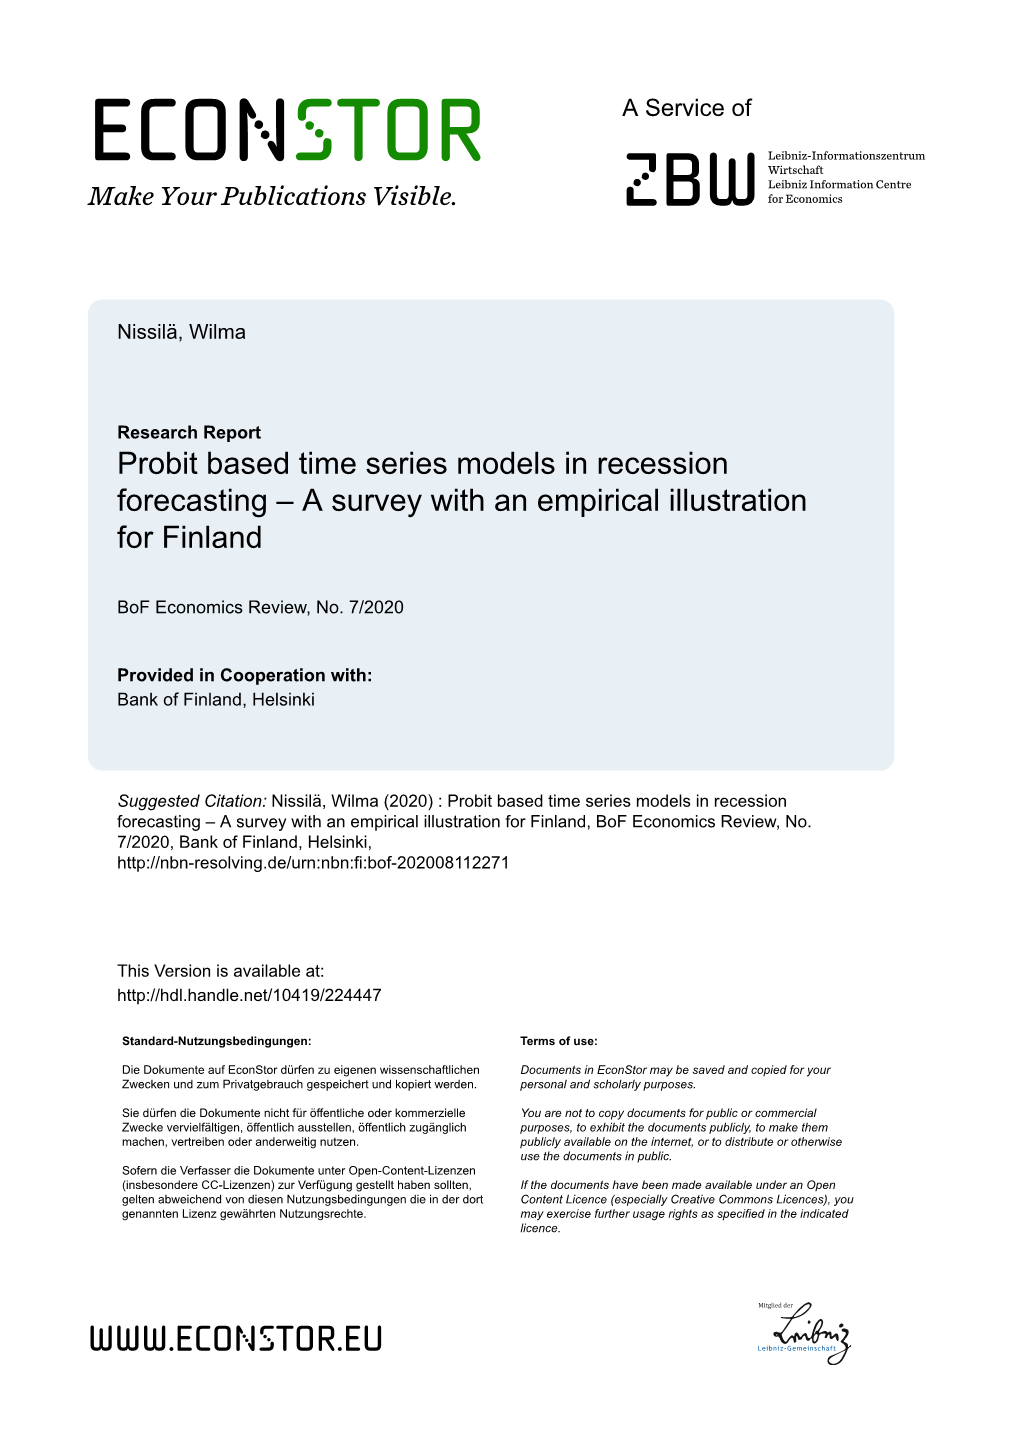 Probit Based Time Series Models in Recession Forecasting – a Survey with an Empirical Illustration for Finland